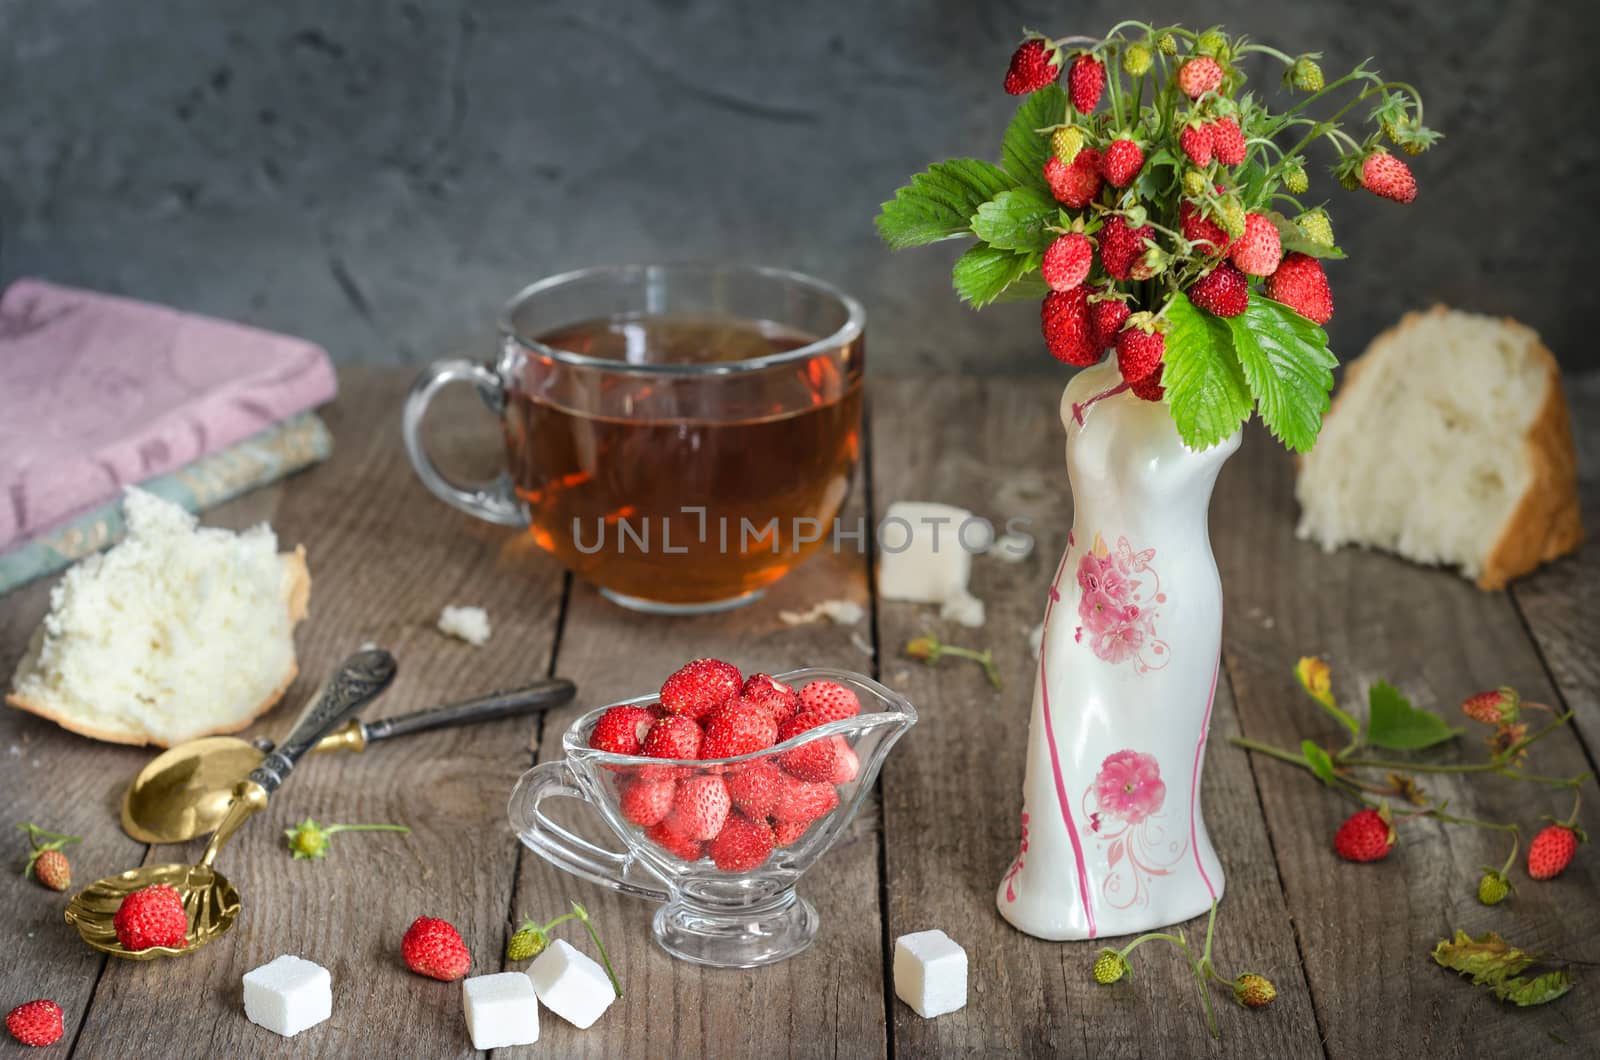 Strawberries in a glass Cup and a bouquet of wild strawberries in a vase. White bread crumb, antique spoons and tea, rustic Style, background blur.